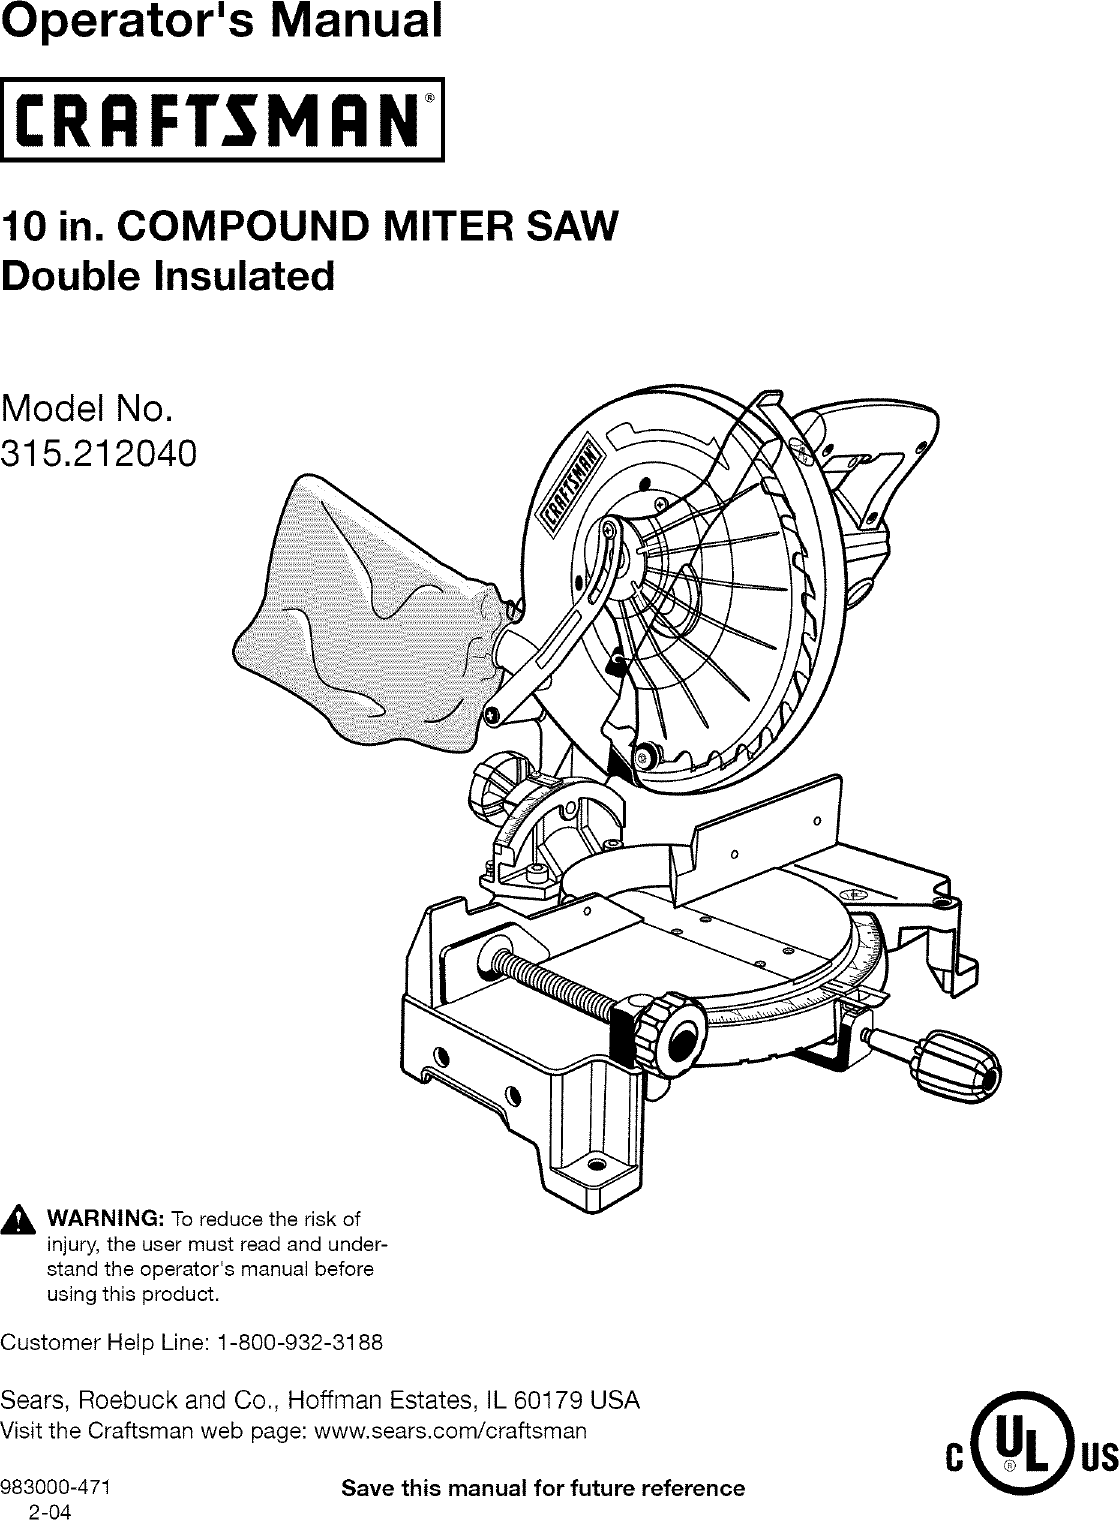 Craftsman 315212040 User Manual 10 COMPOUND MITER SAW Manuals And